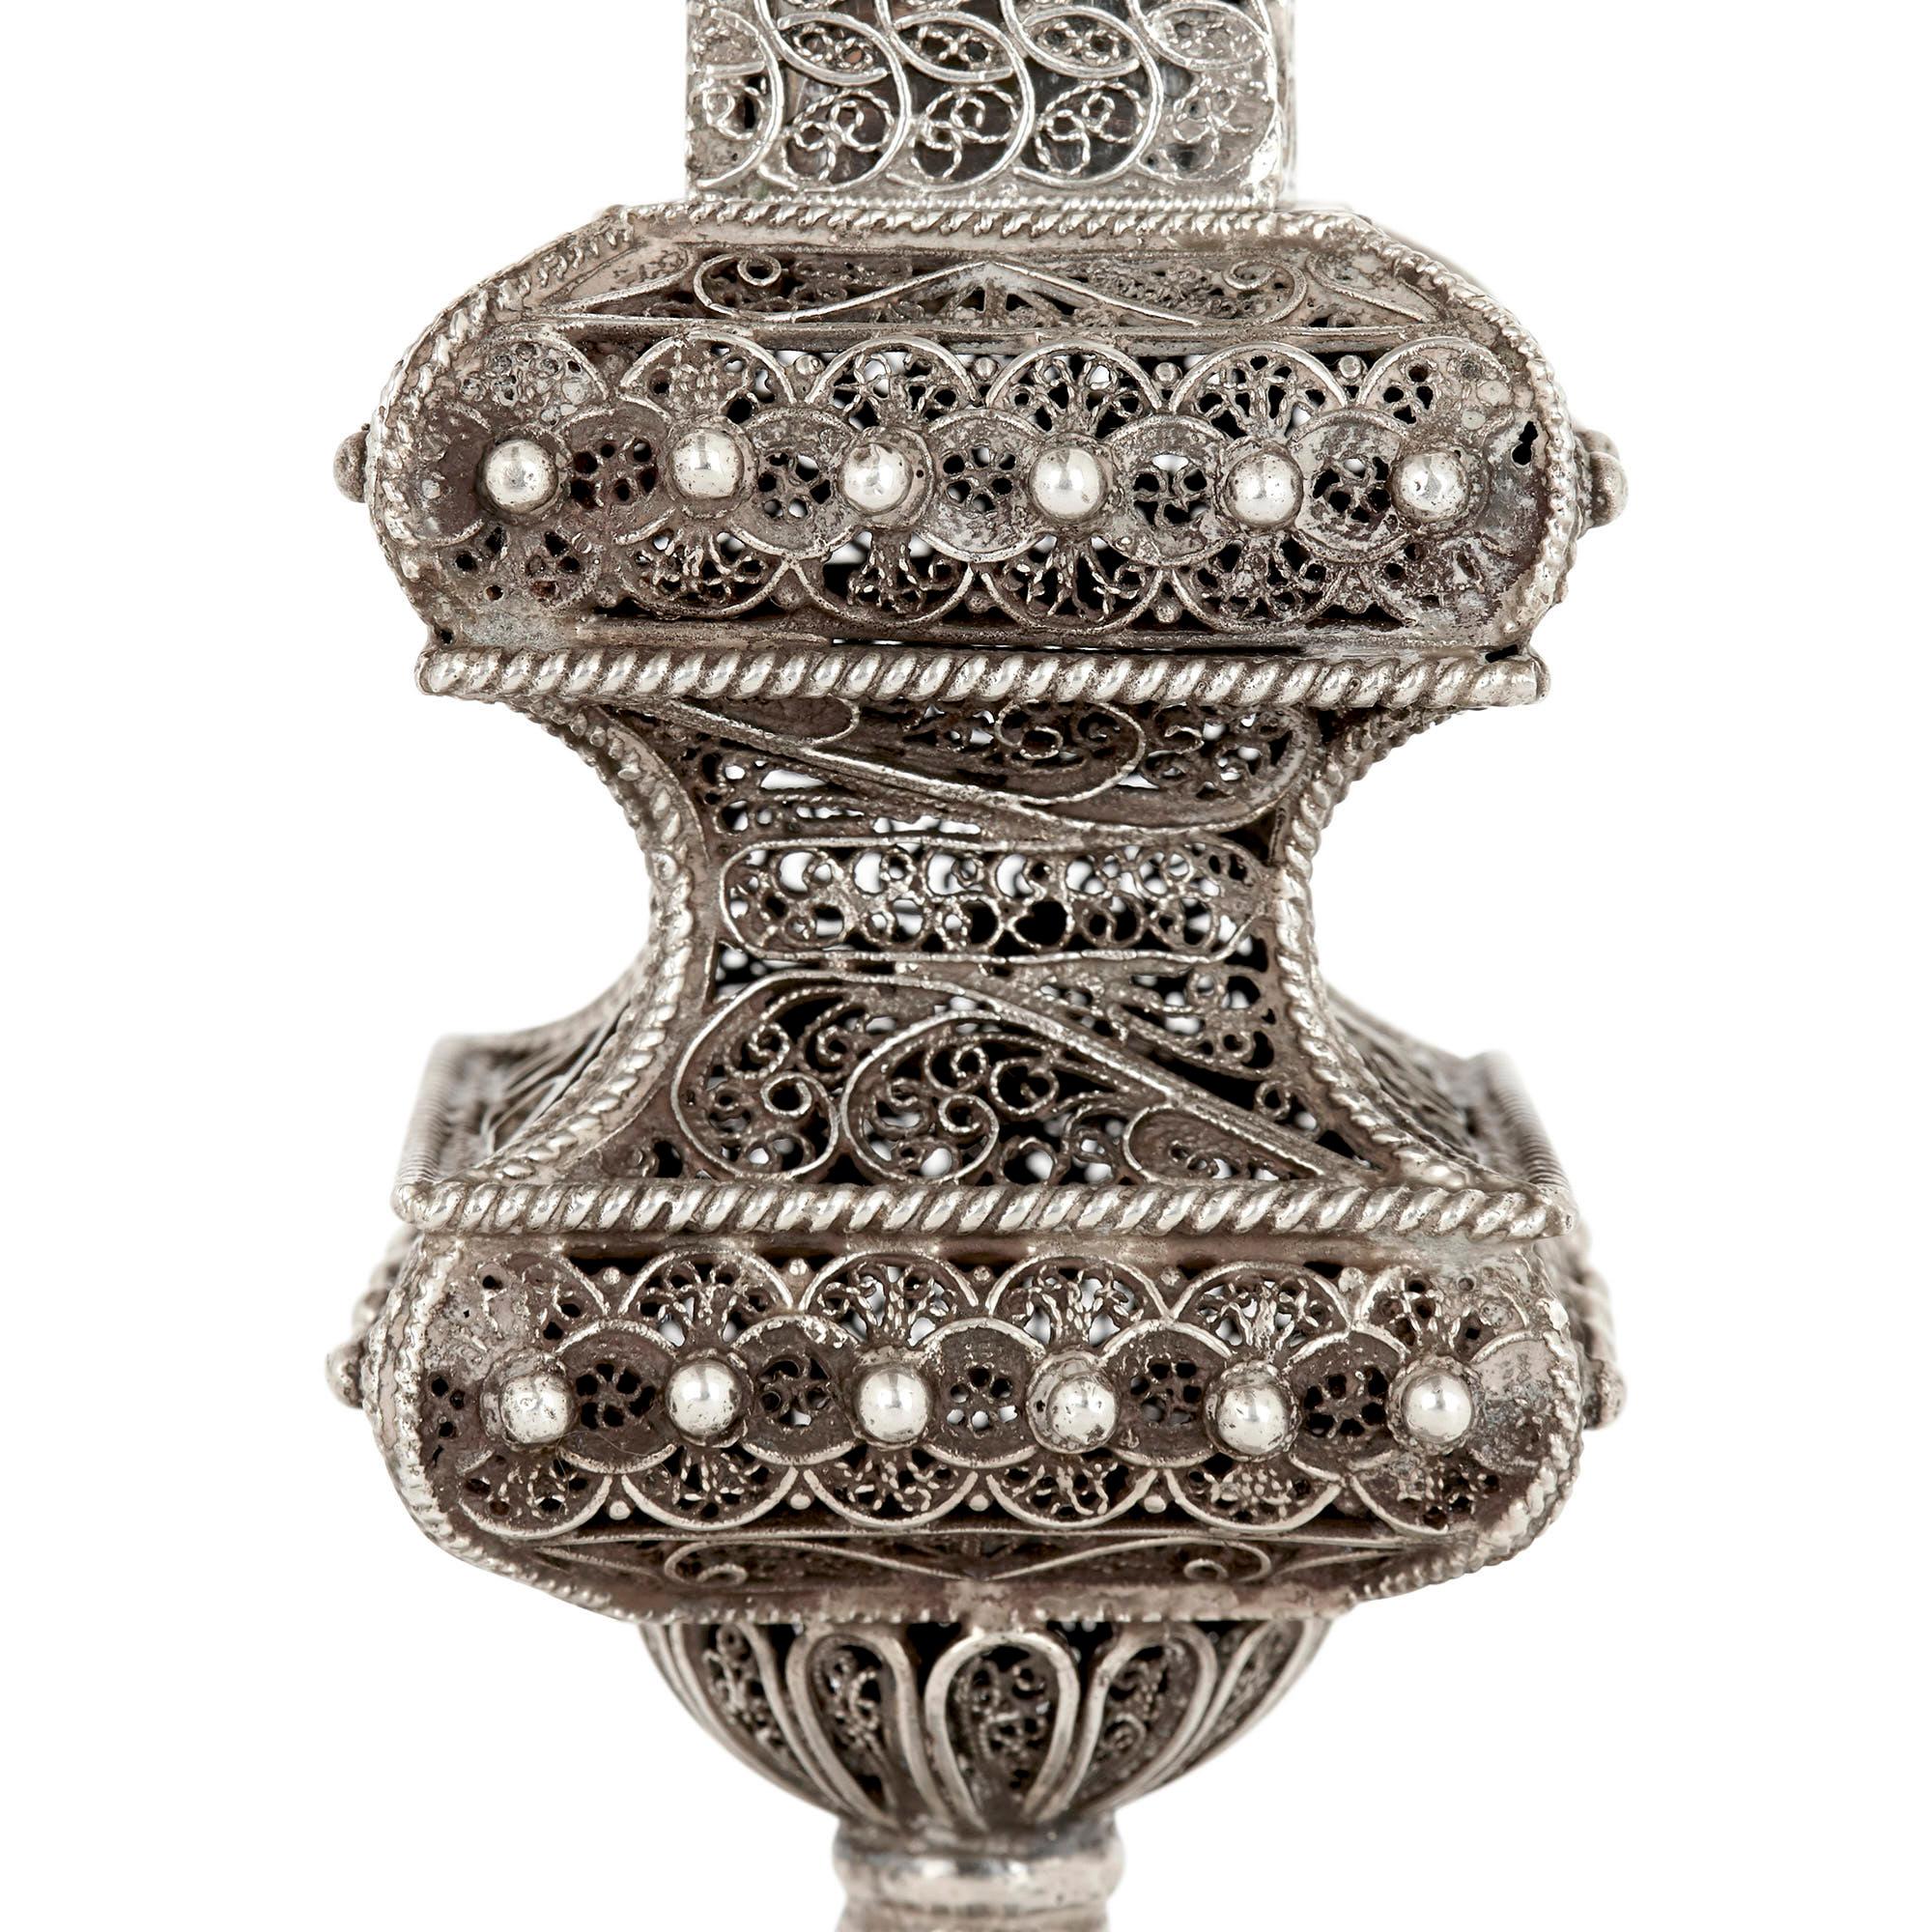 The body of this large spice tower is decorated all over with fine filigree work, wrought into scrolled and geometrical designs. The tower, supported by a ball stem upon a square base, features a pinched body and a detachable pyramidal form top.